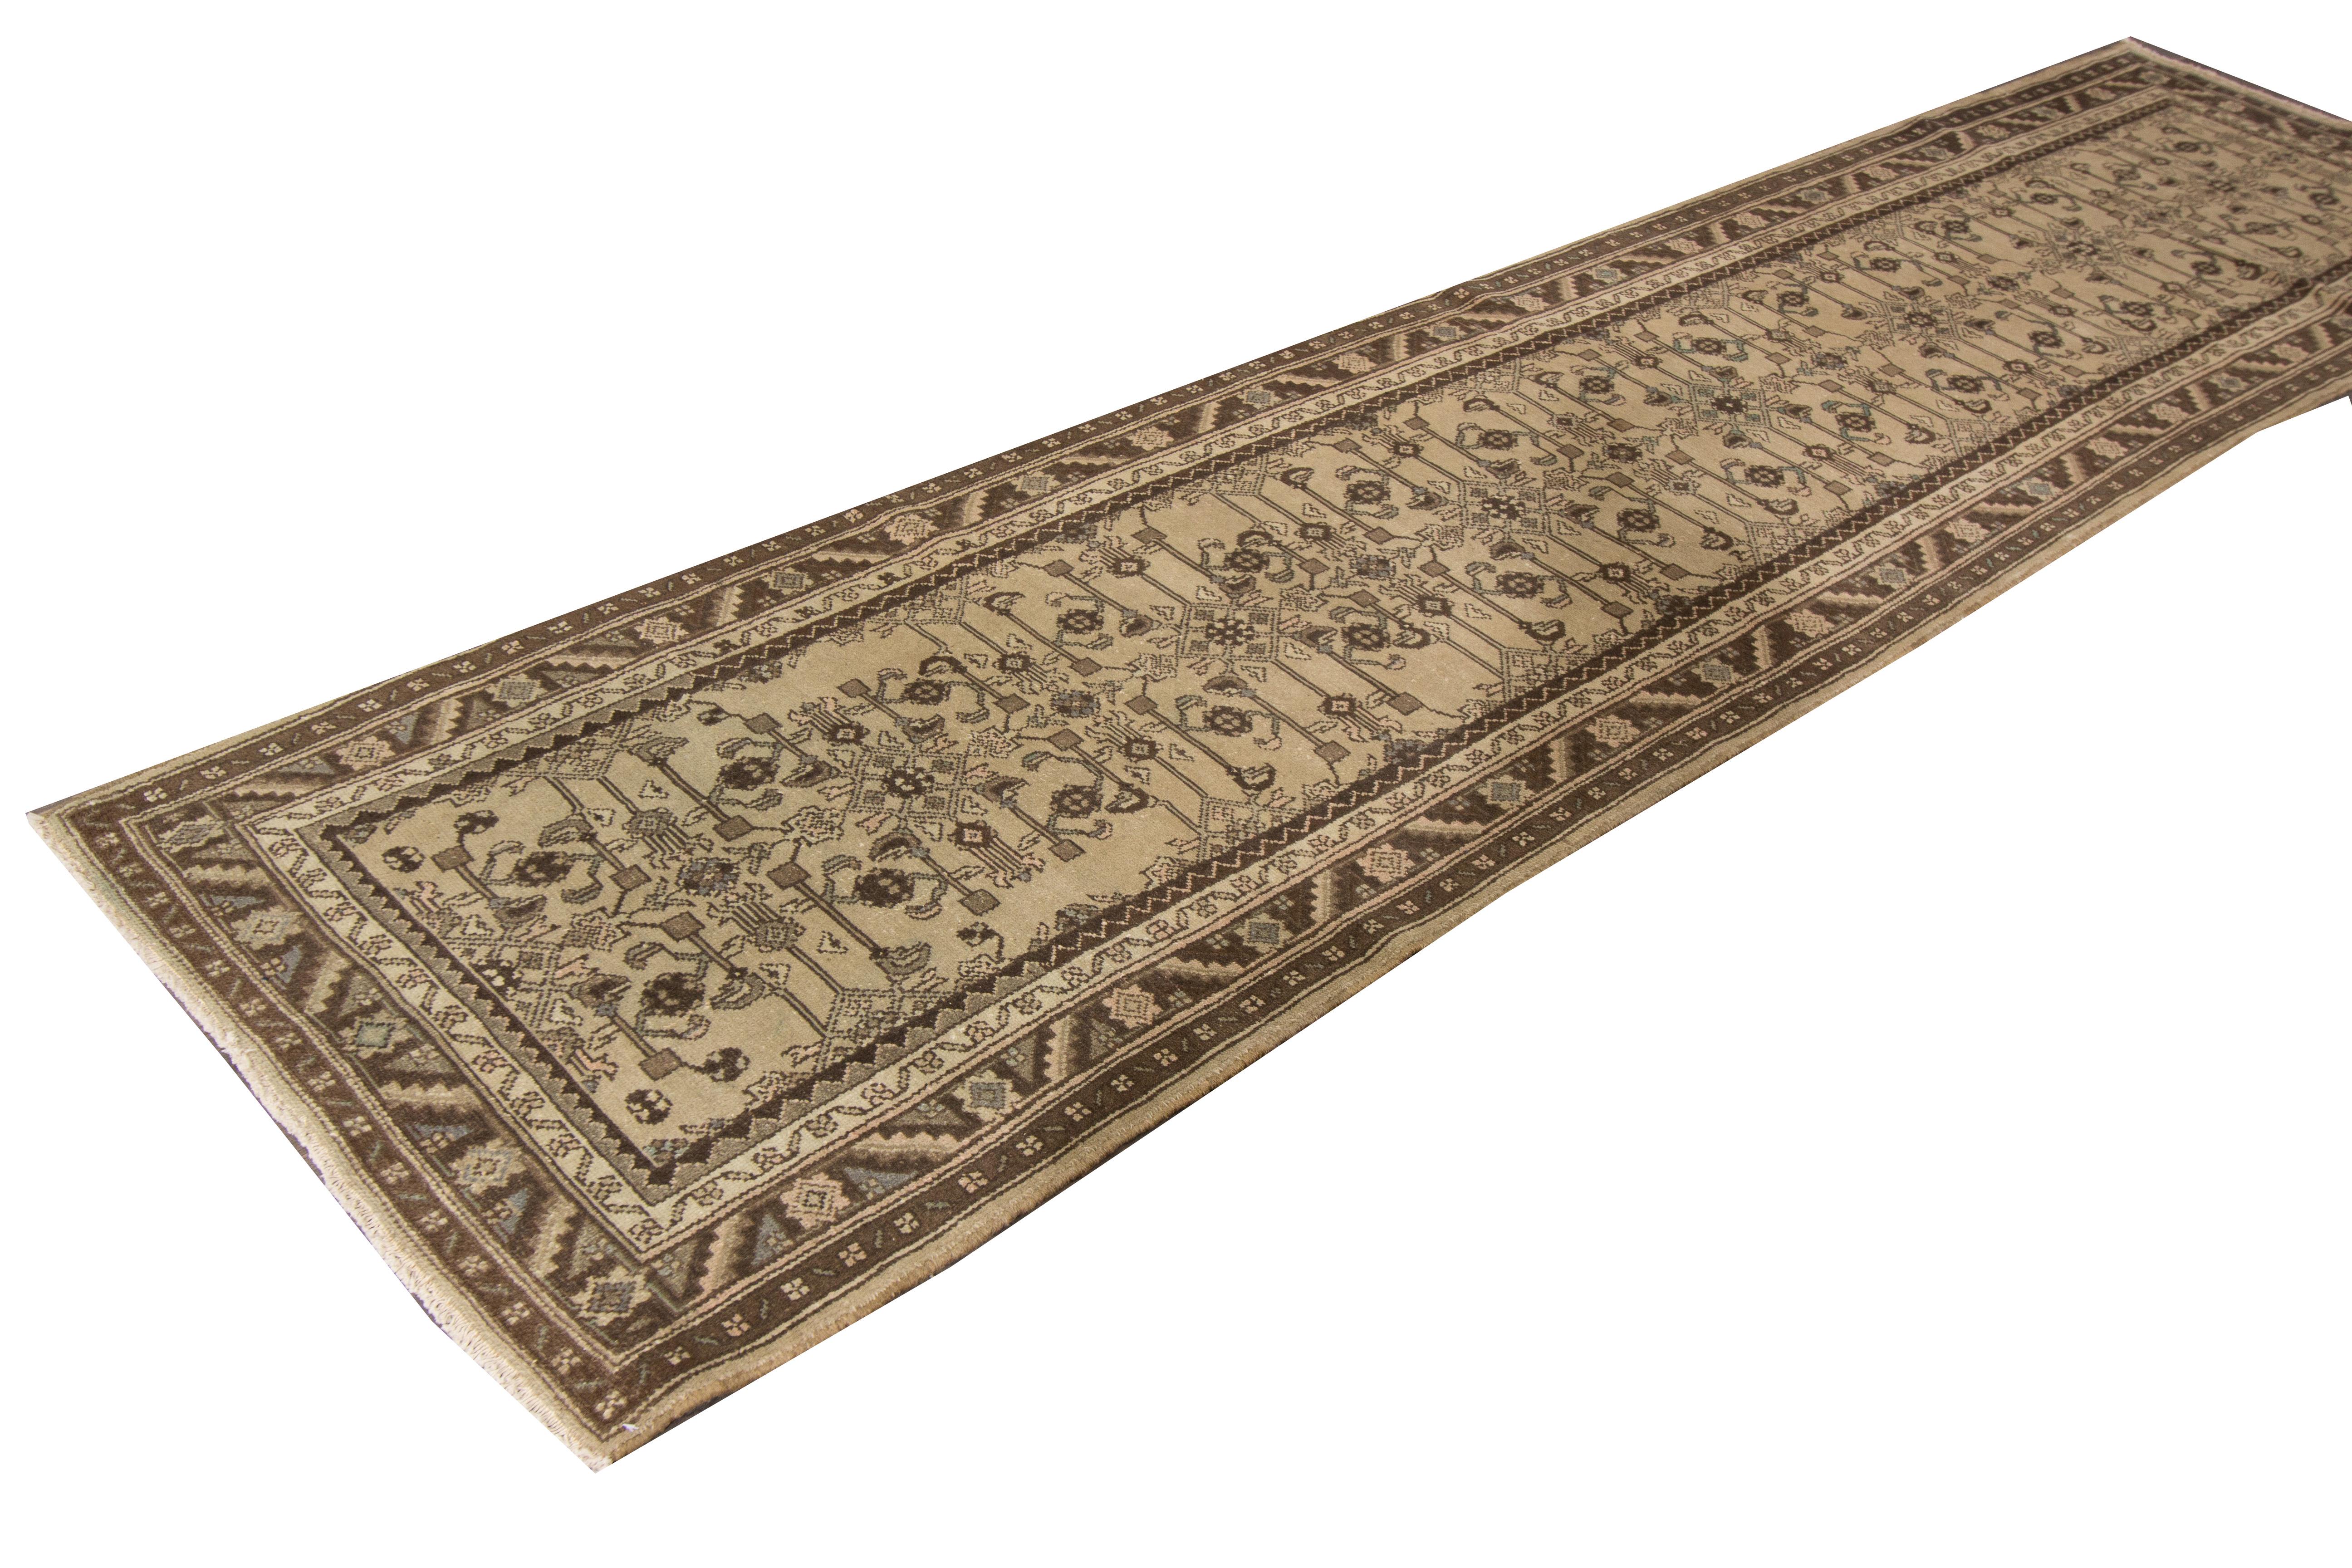 Beautiful Malayer Runner rug with a brown field and gray accents with an all-over geometric design. 

This rug measures 2' 11